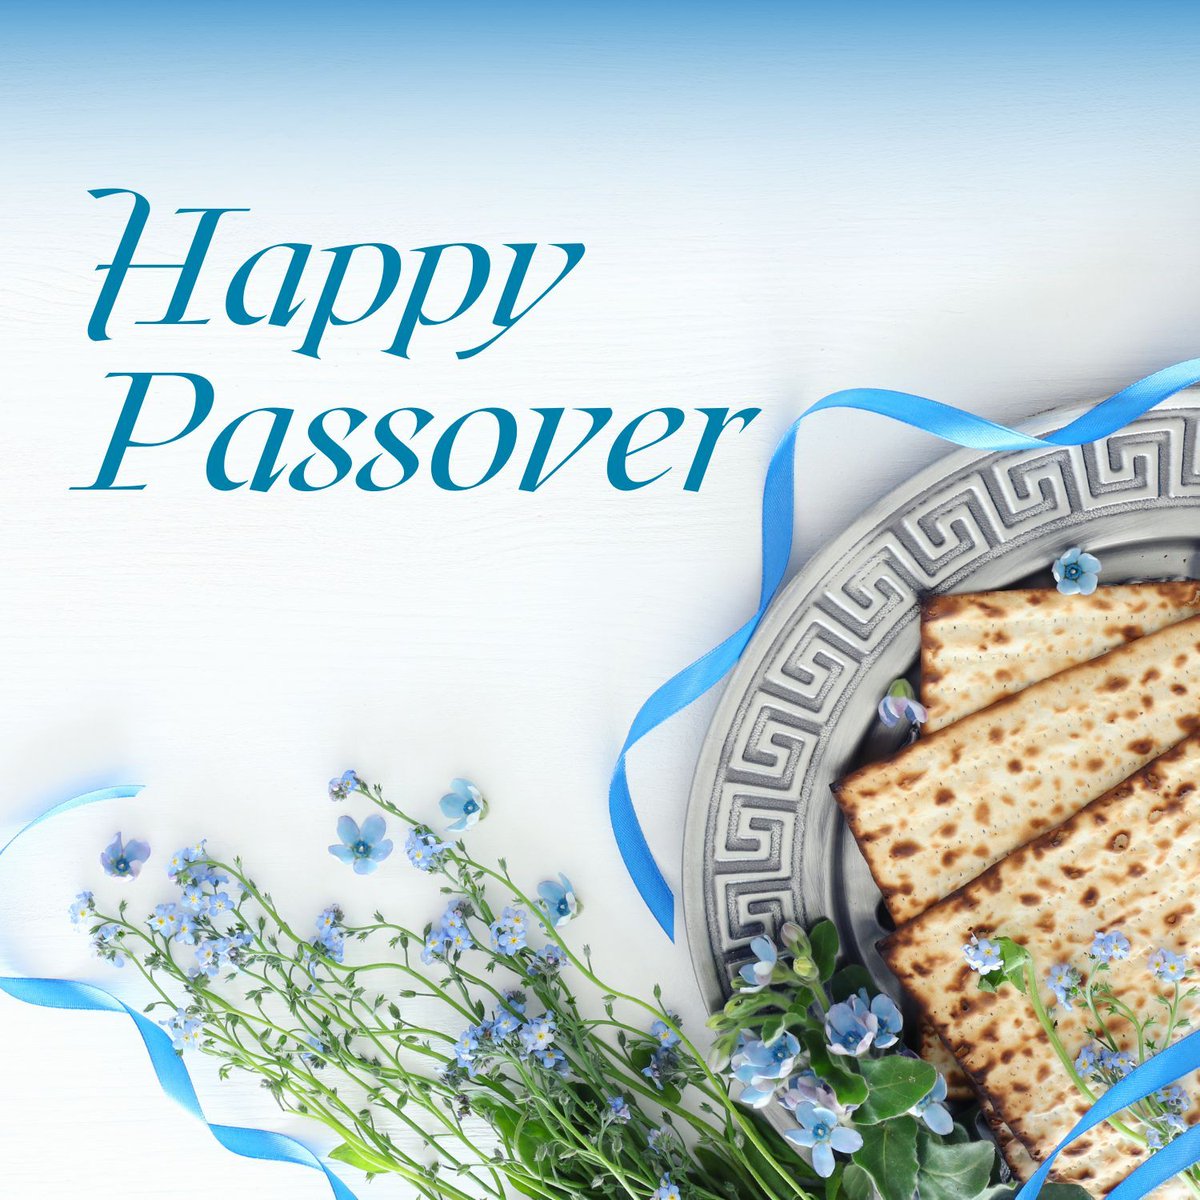 Wishing Jewish people everywhere a joyous Pesach! May your days be filled with blessings during Passover and throughout the year ahead.